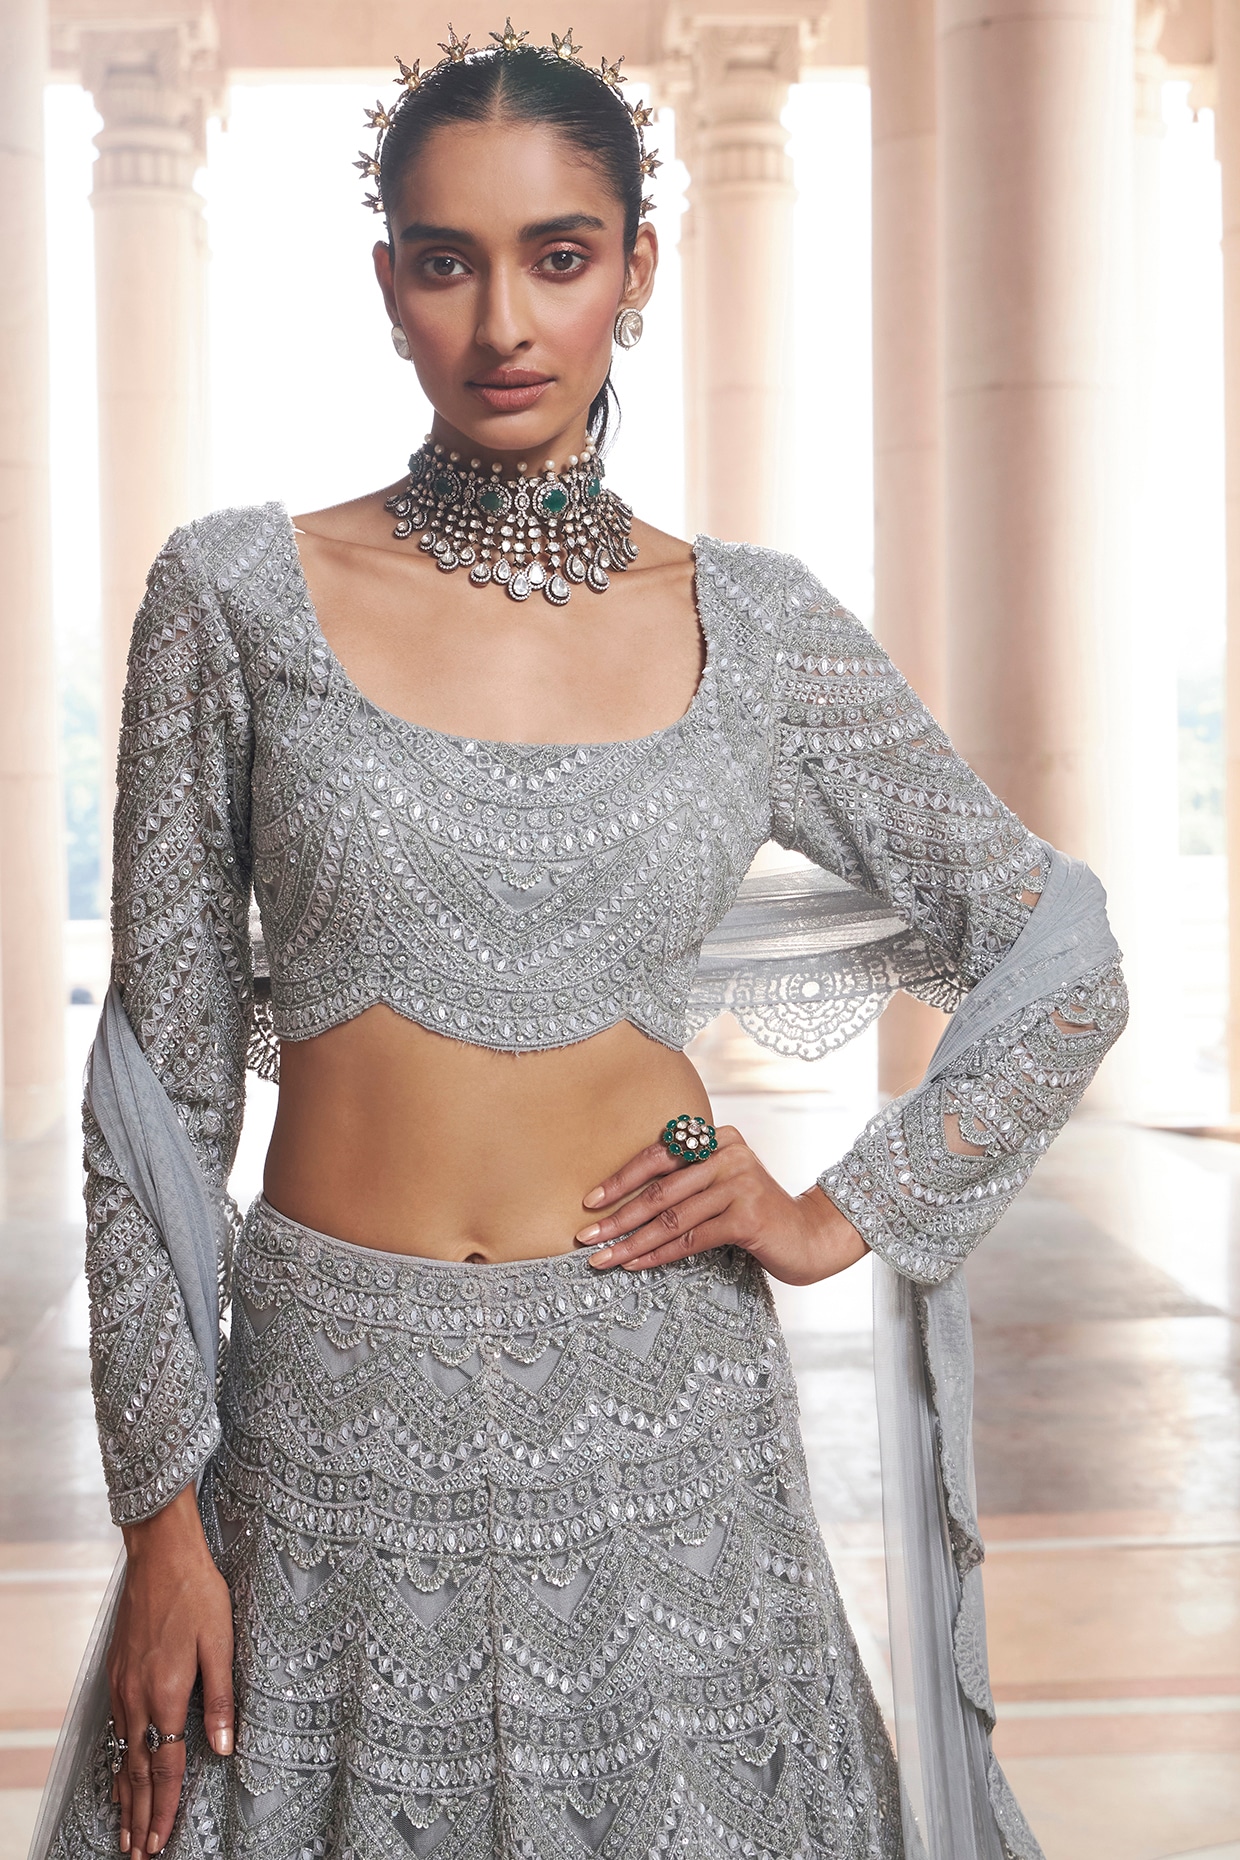 STEEL GREY SILVER LEHENGA SET WITH ALL OVER SILVER AND GOLD LACE EMBROIDERY  PAIRED WITH A MATCHING DUPATTA AND ALL OVER SILVER AND GOLD EMBELLISHMENTS.  - Seasons India